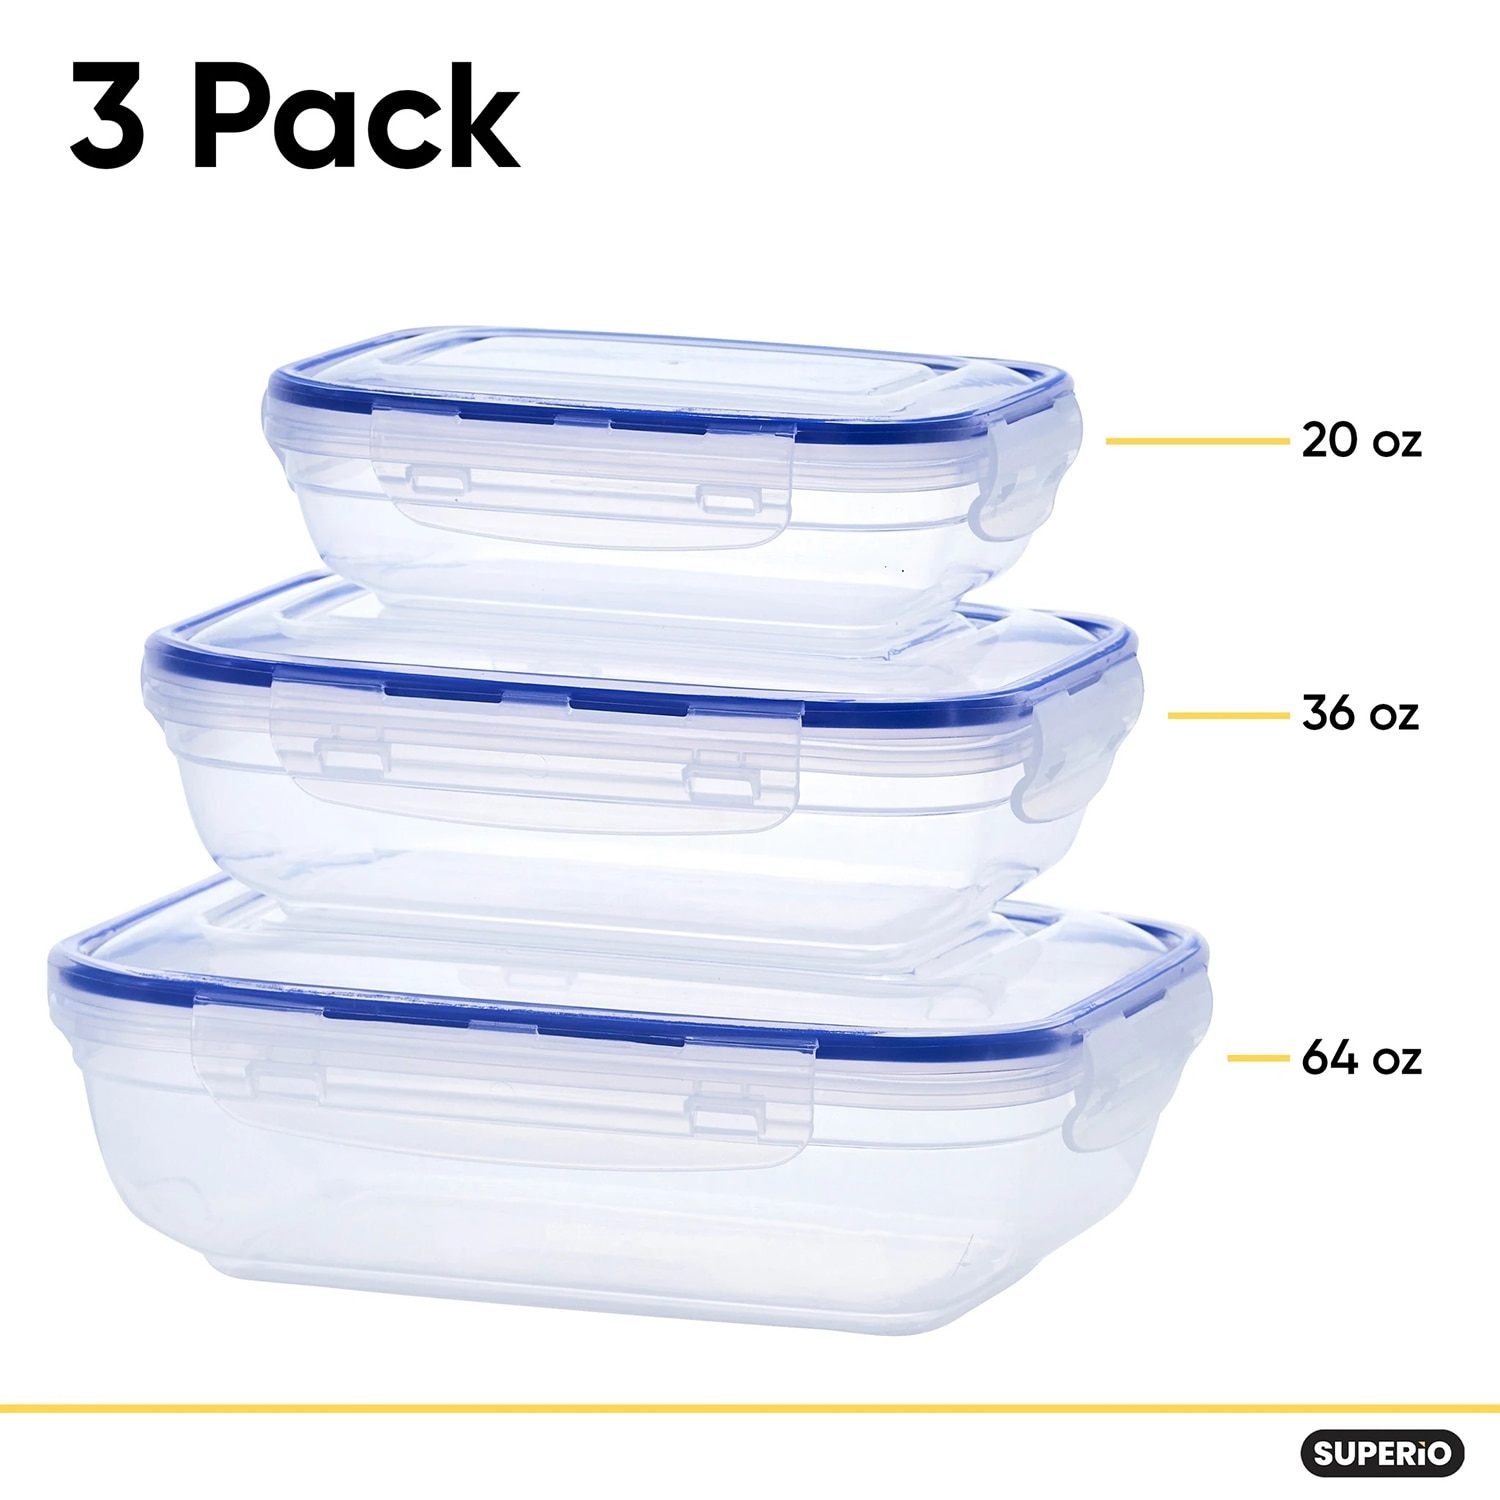 Lasting Freshness 19 Piece Vacuum Seal Food Storage Container Set, Rectangle